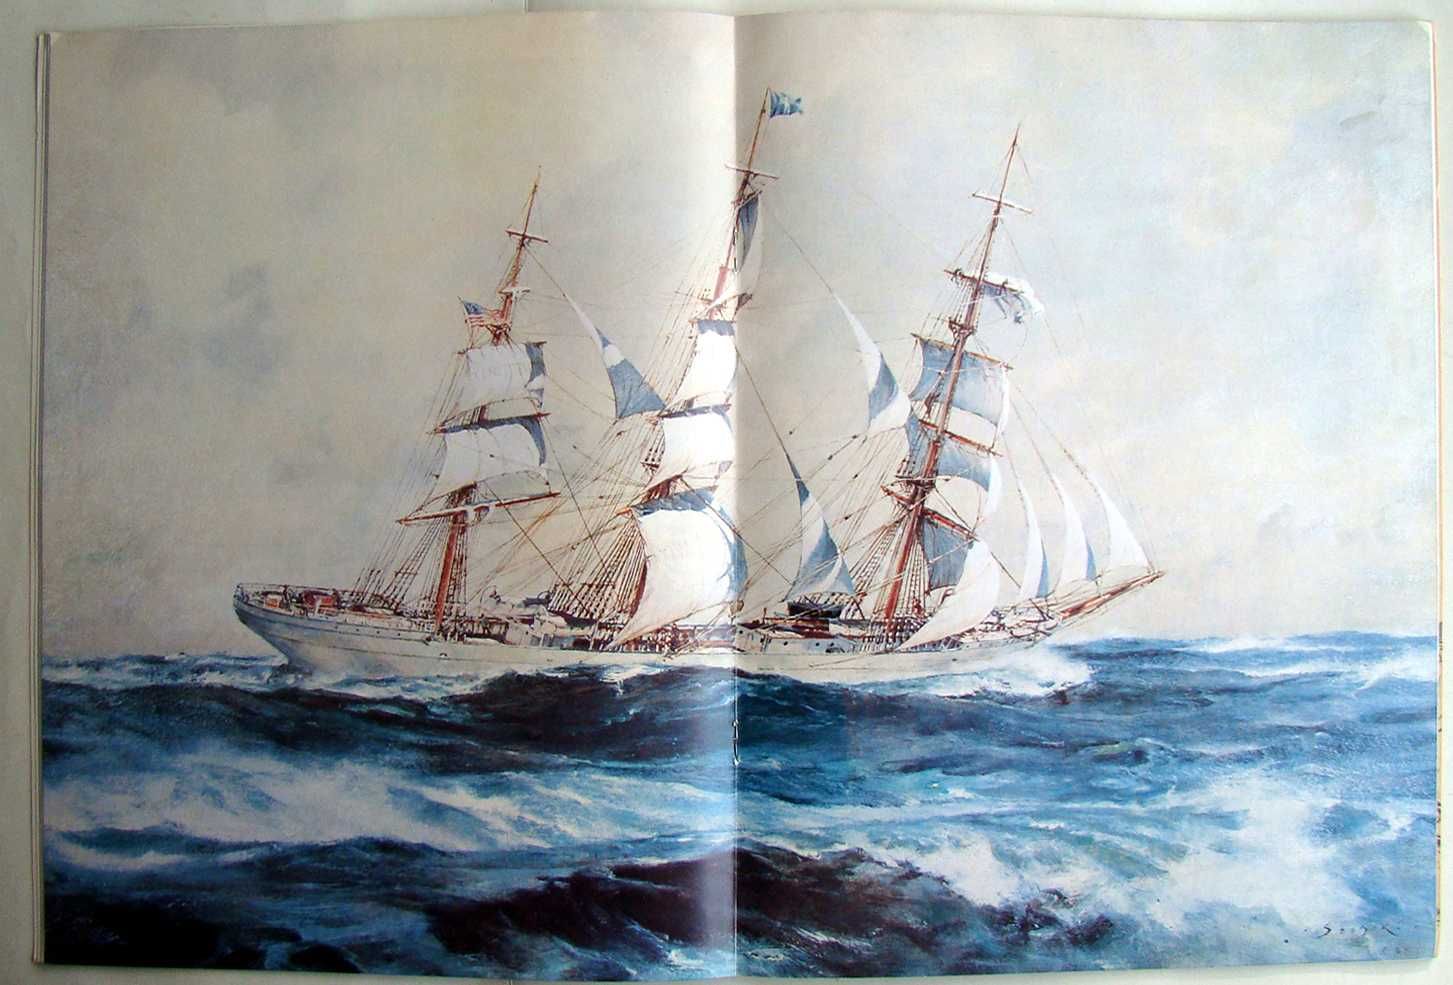 The Compass. A Magazine of the Sea